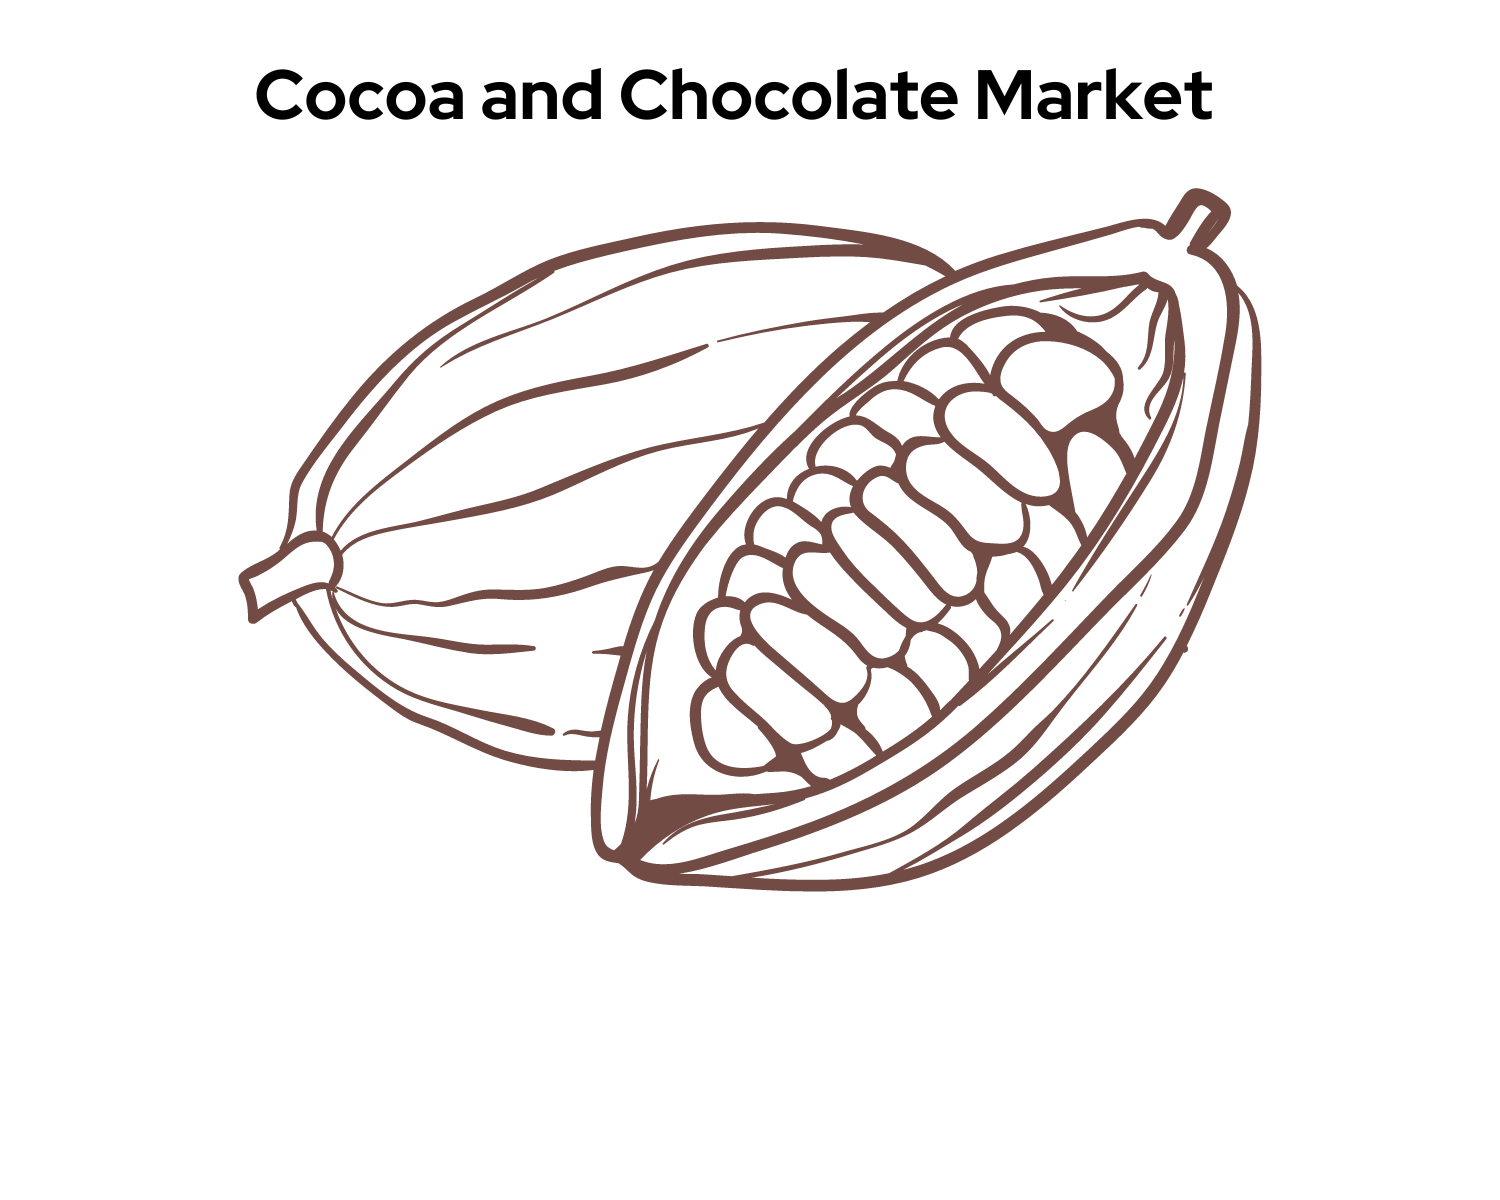 Cocoa and Chocolate Market Is Encouraged to Reach USD 235.8 Billion in 2032 at a CAGR of 4.2% | Market.us